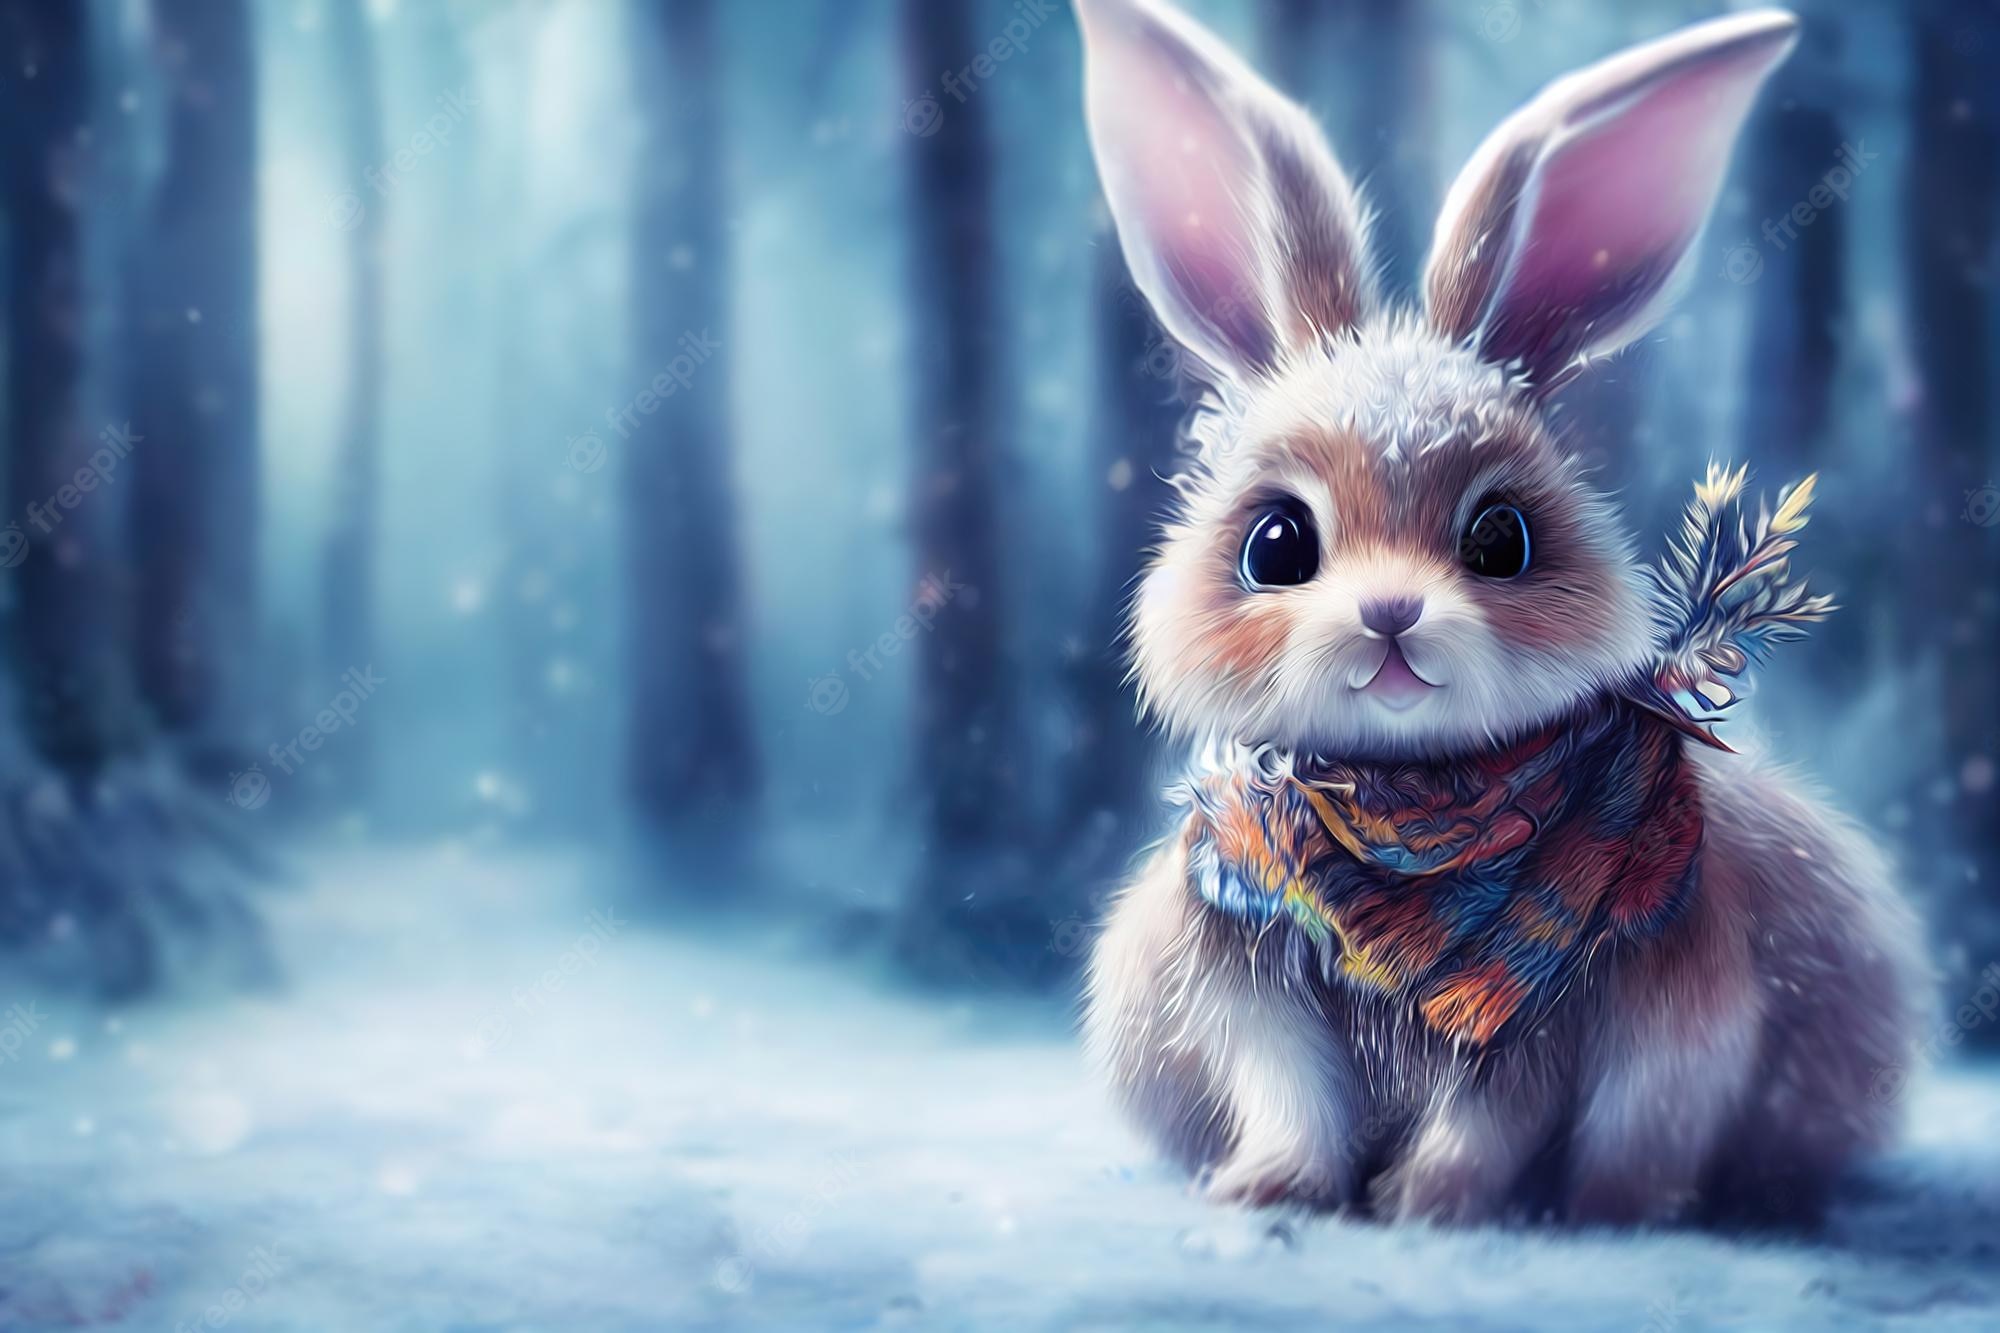 Premium Photo. Rabbit in the winter forest christmas background